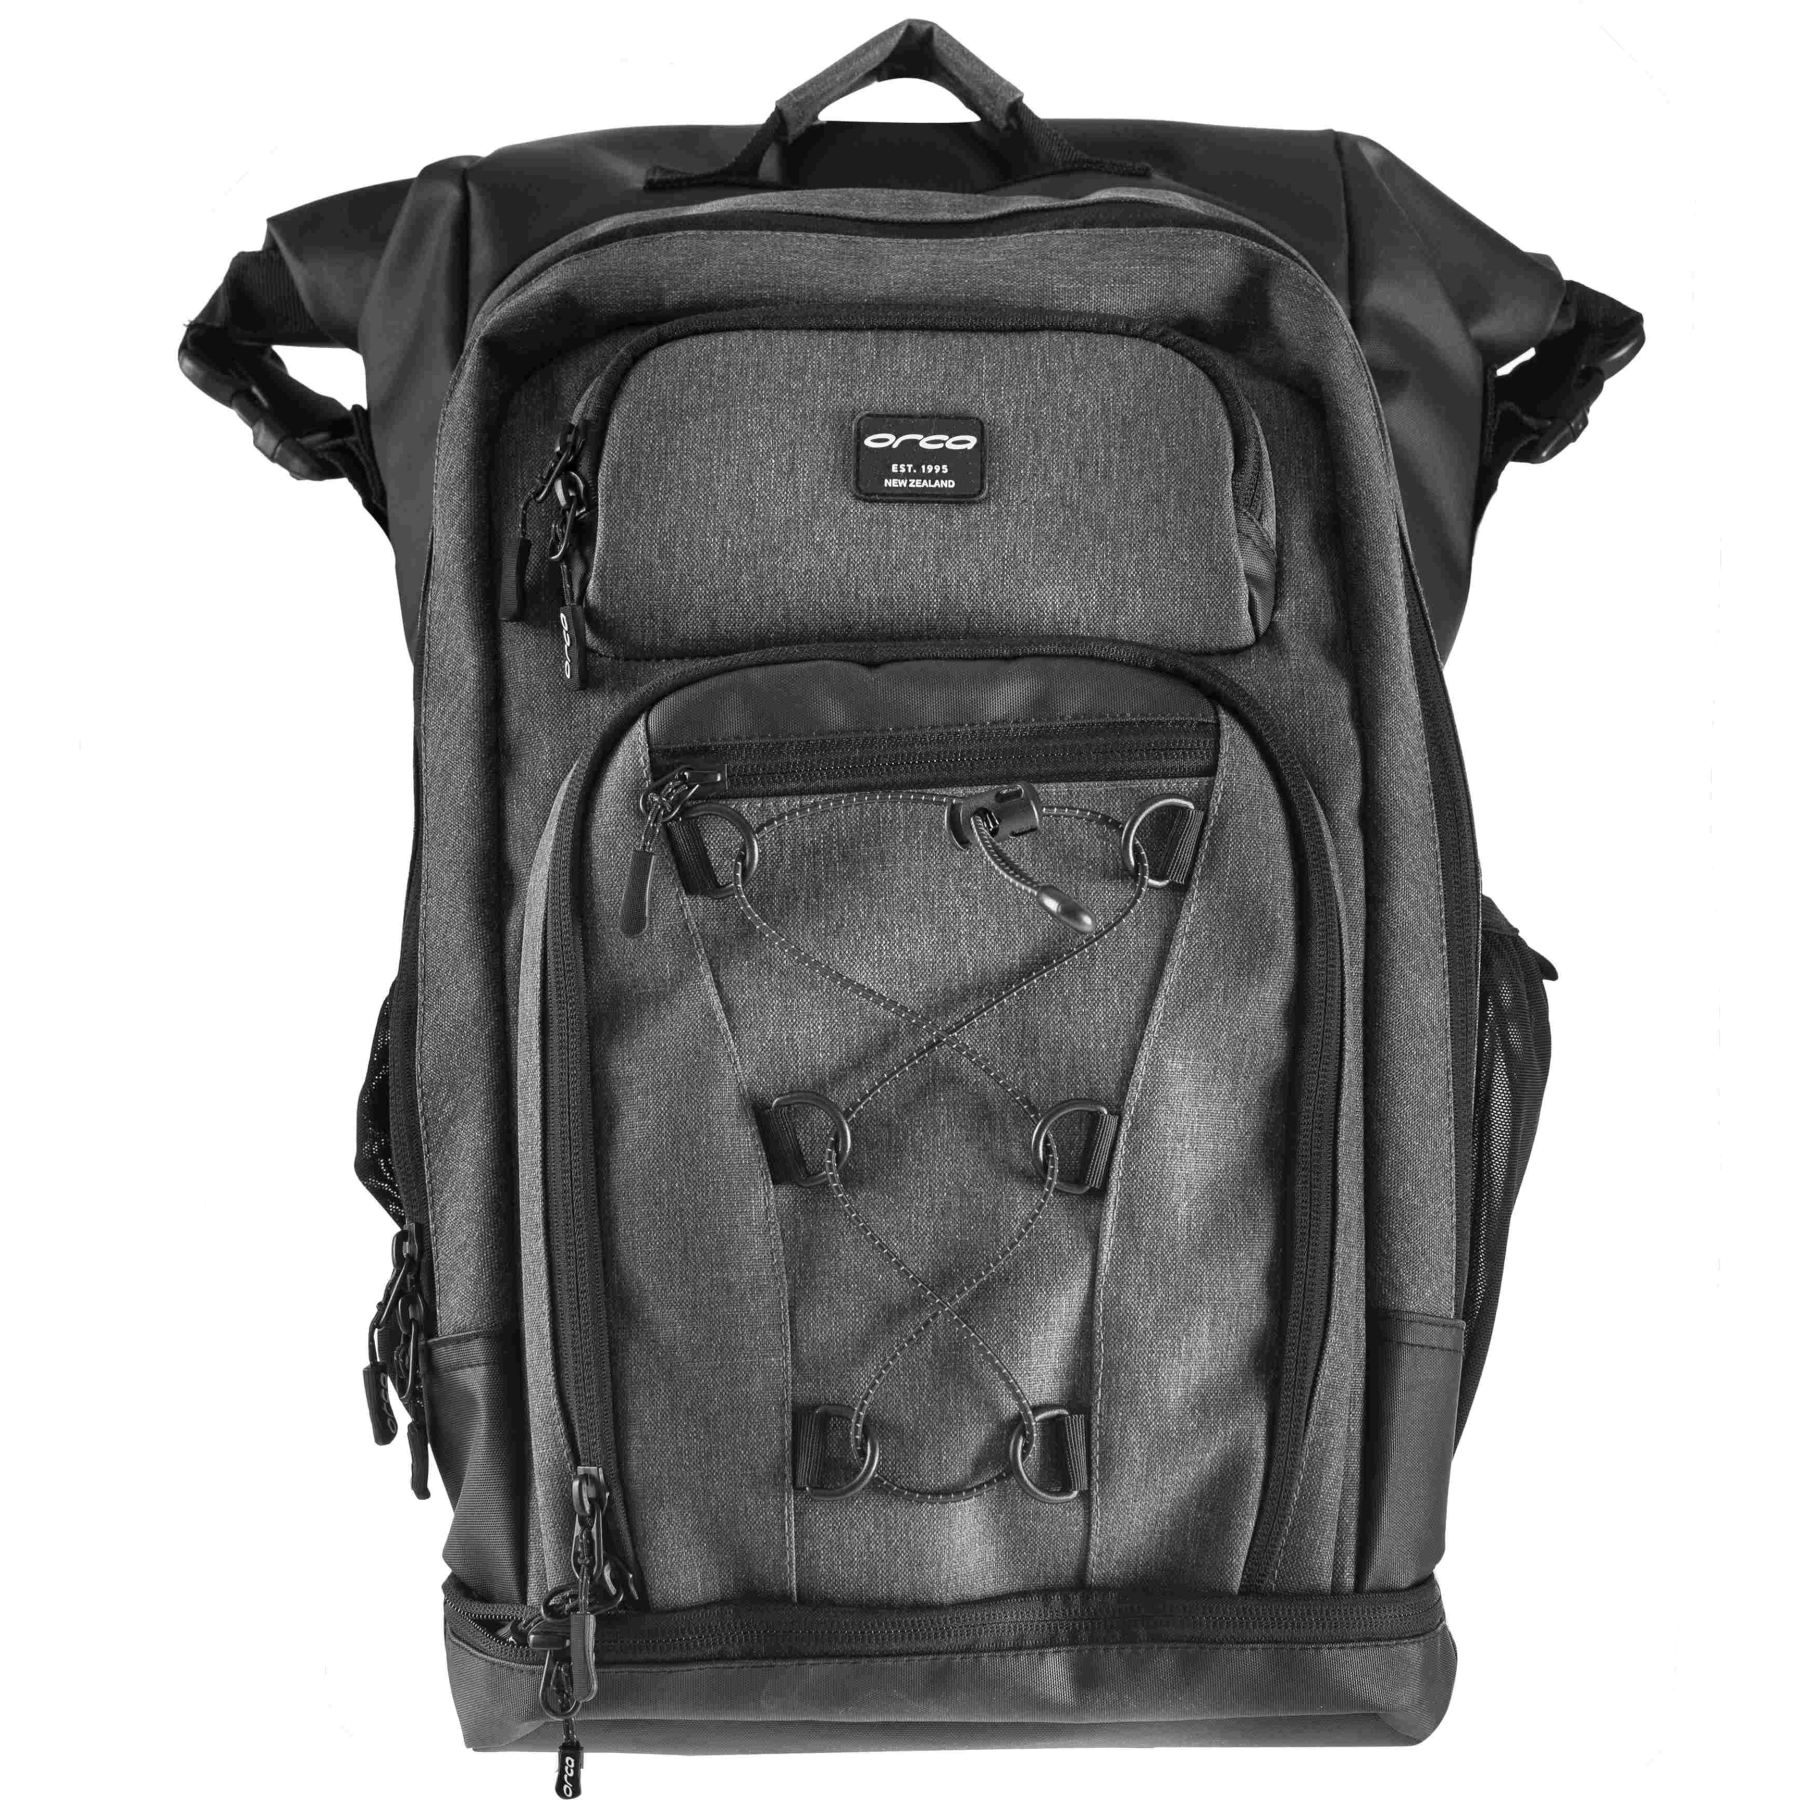 Picture of Orca Openwater Backpack - black